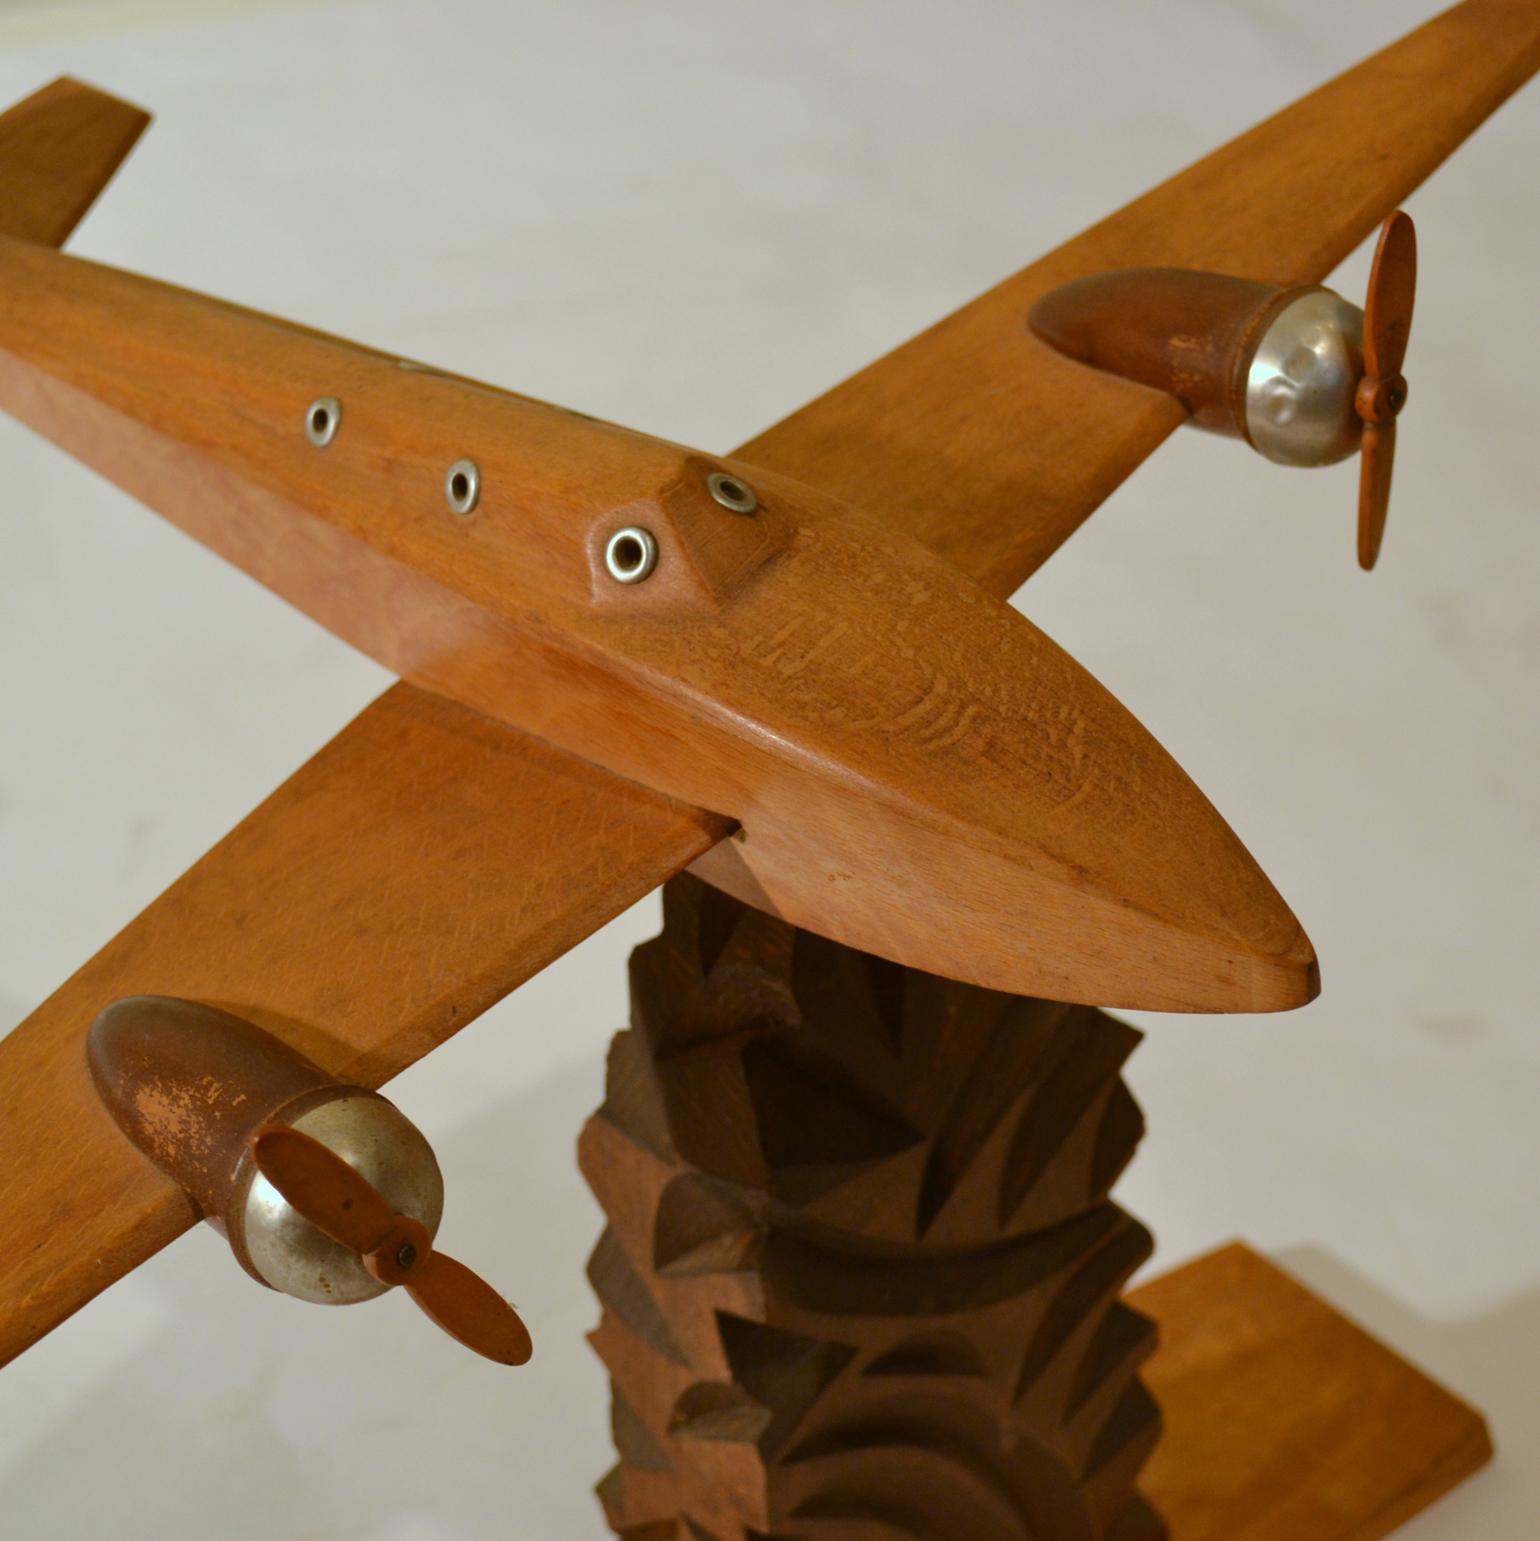 Hand-Carved 1950s Wooden Airplane Model Sculpture